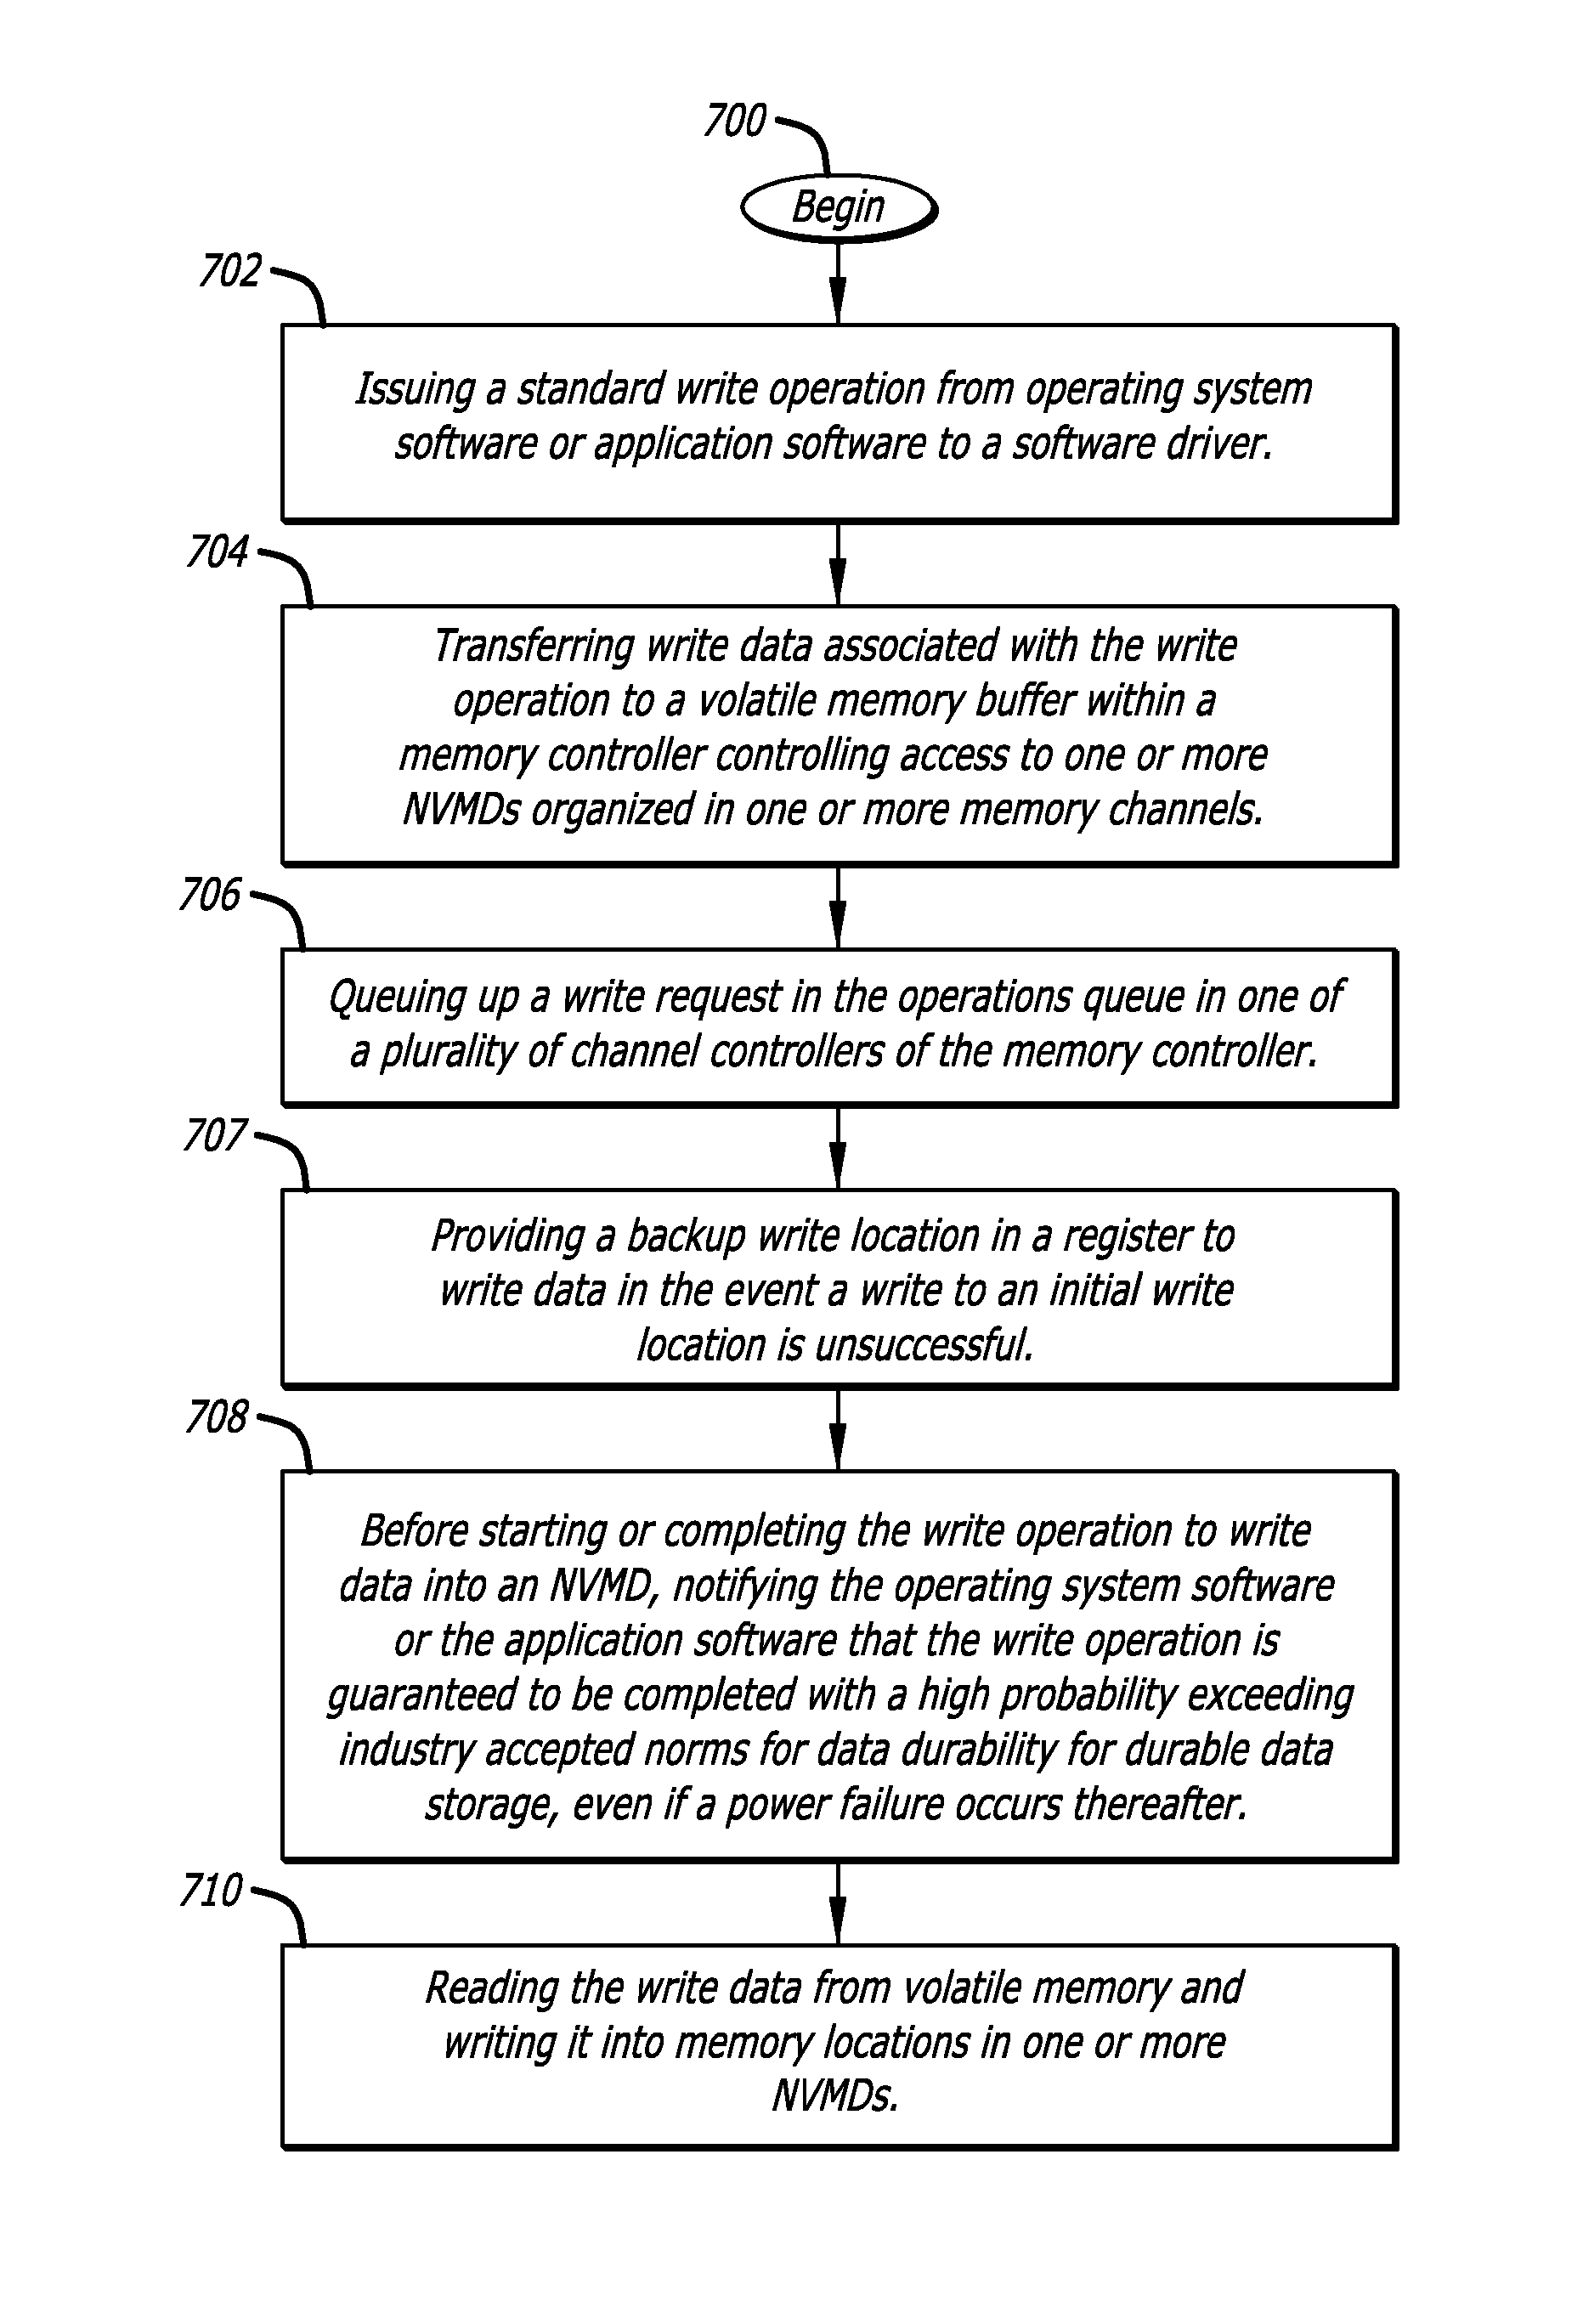 Methods for early write termination with non-volatile memory